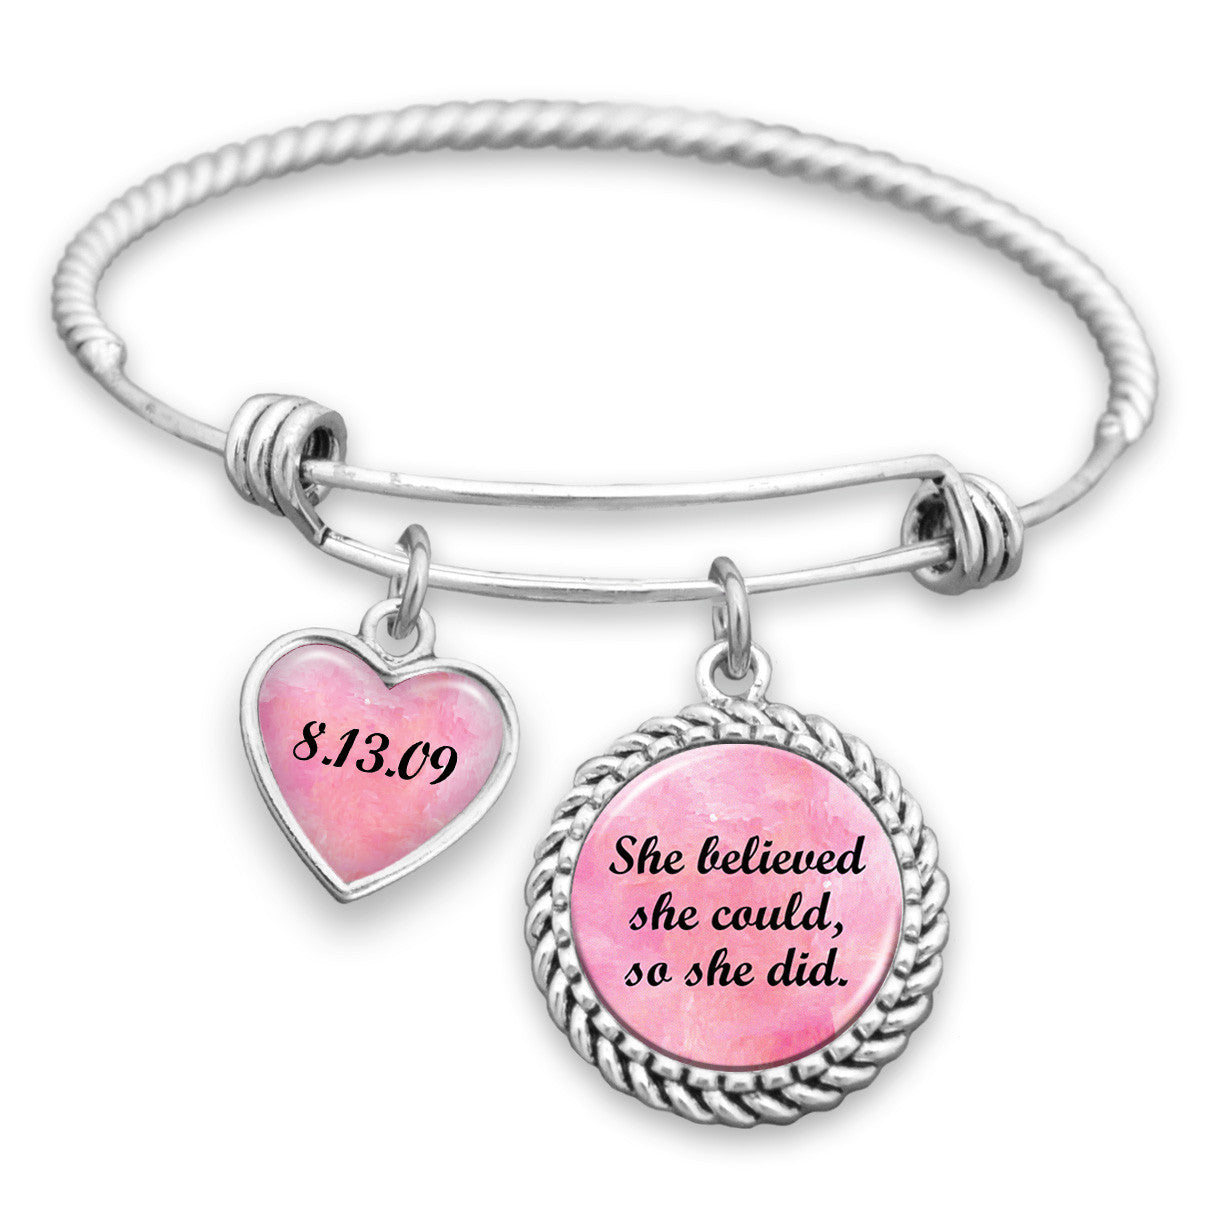 She Believed She Could, So She Did Personalized Sobriety Date Charm Bracelet